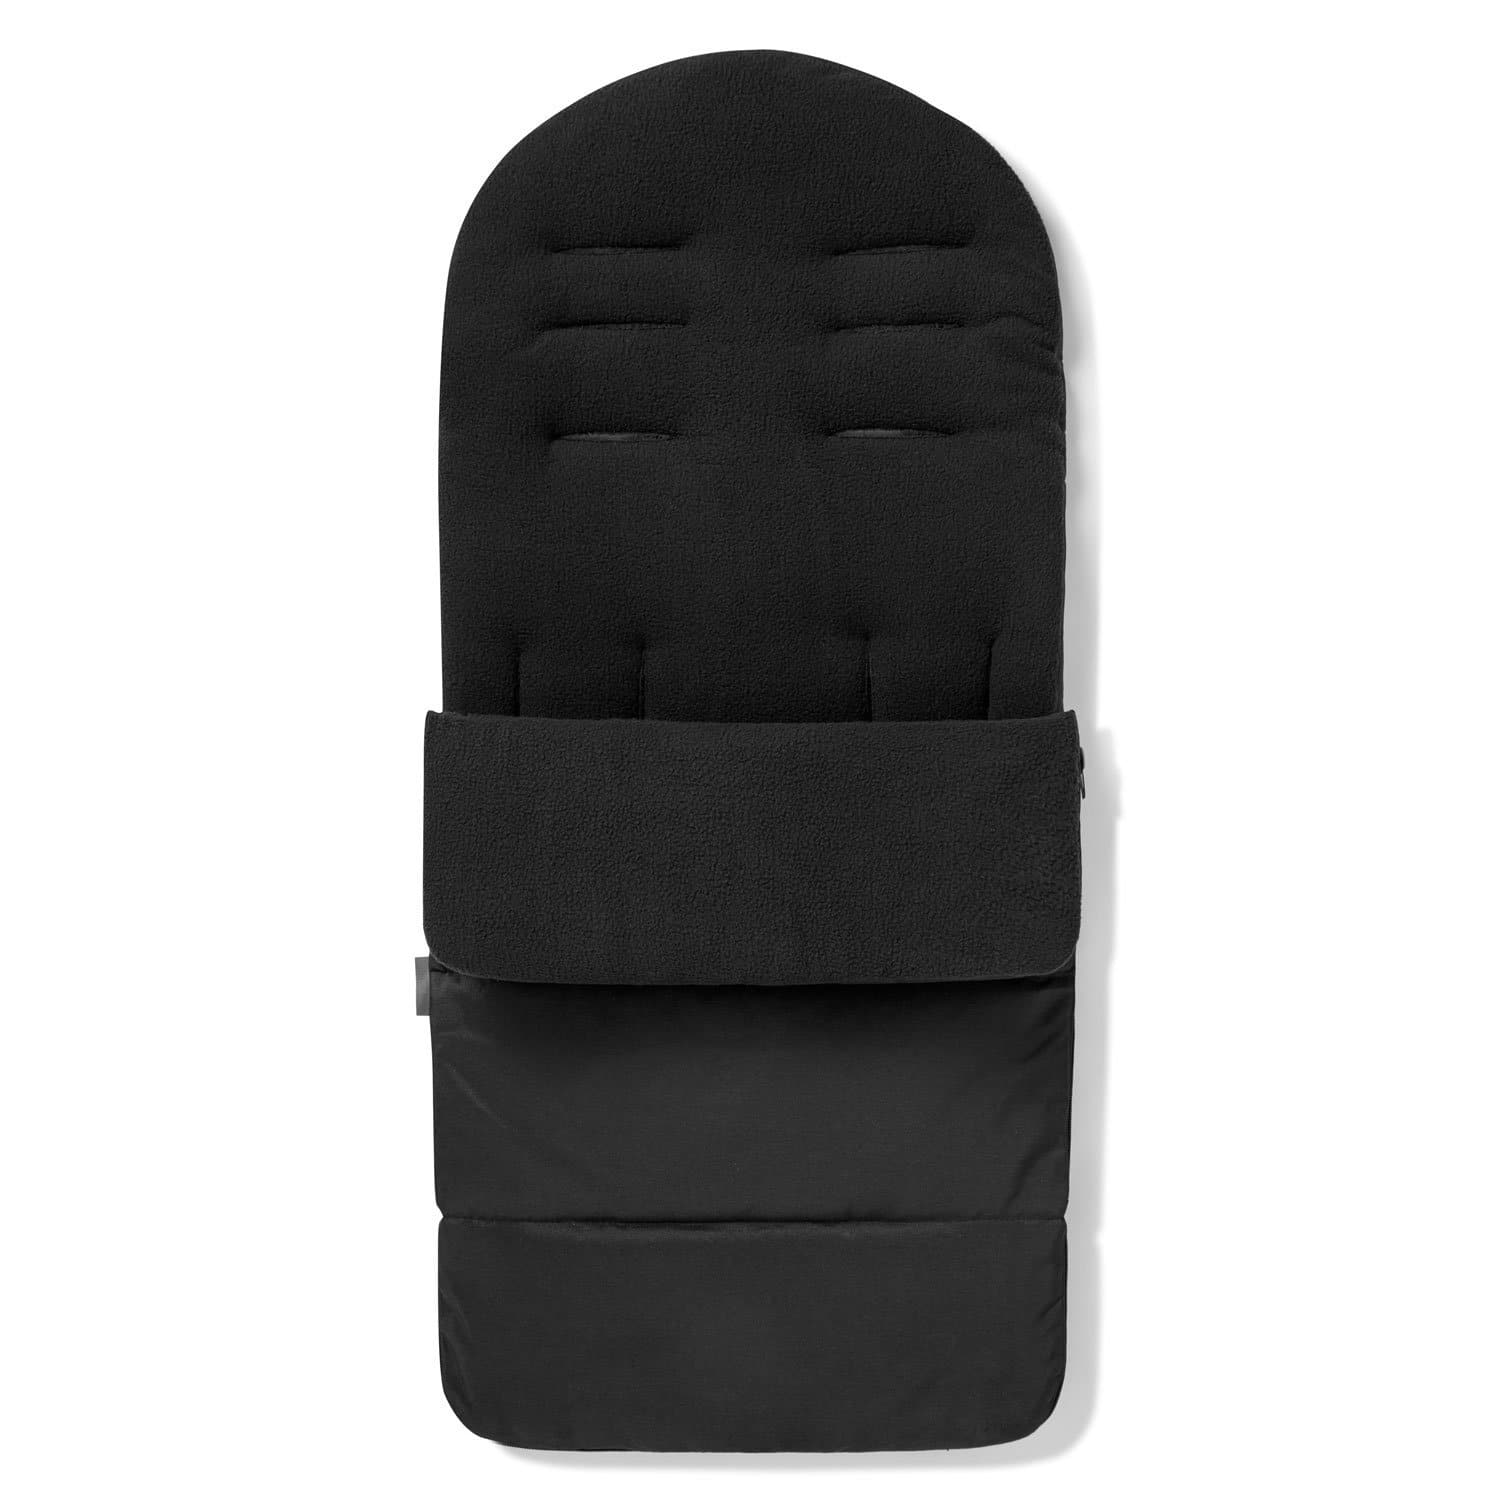 Premium Footmuff / Cosy Toes Compatible with Baby Weavers - Black Jack / Fits All Models | For Your Little One